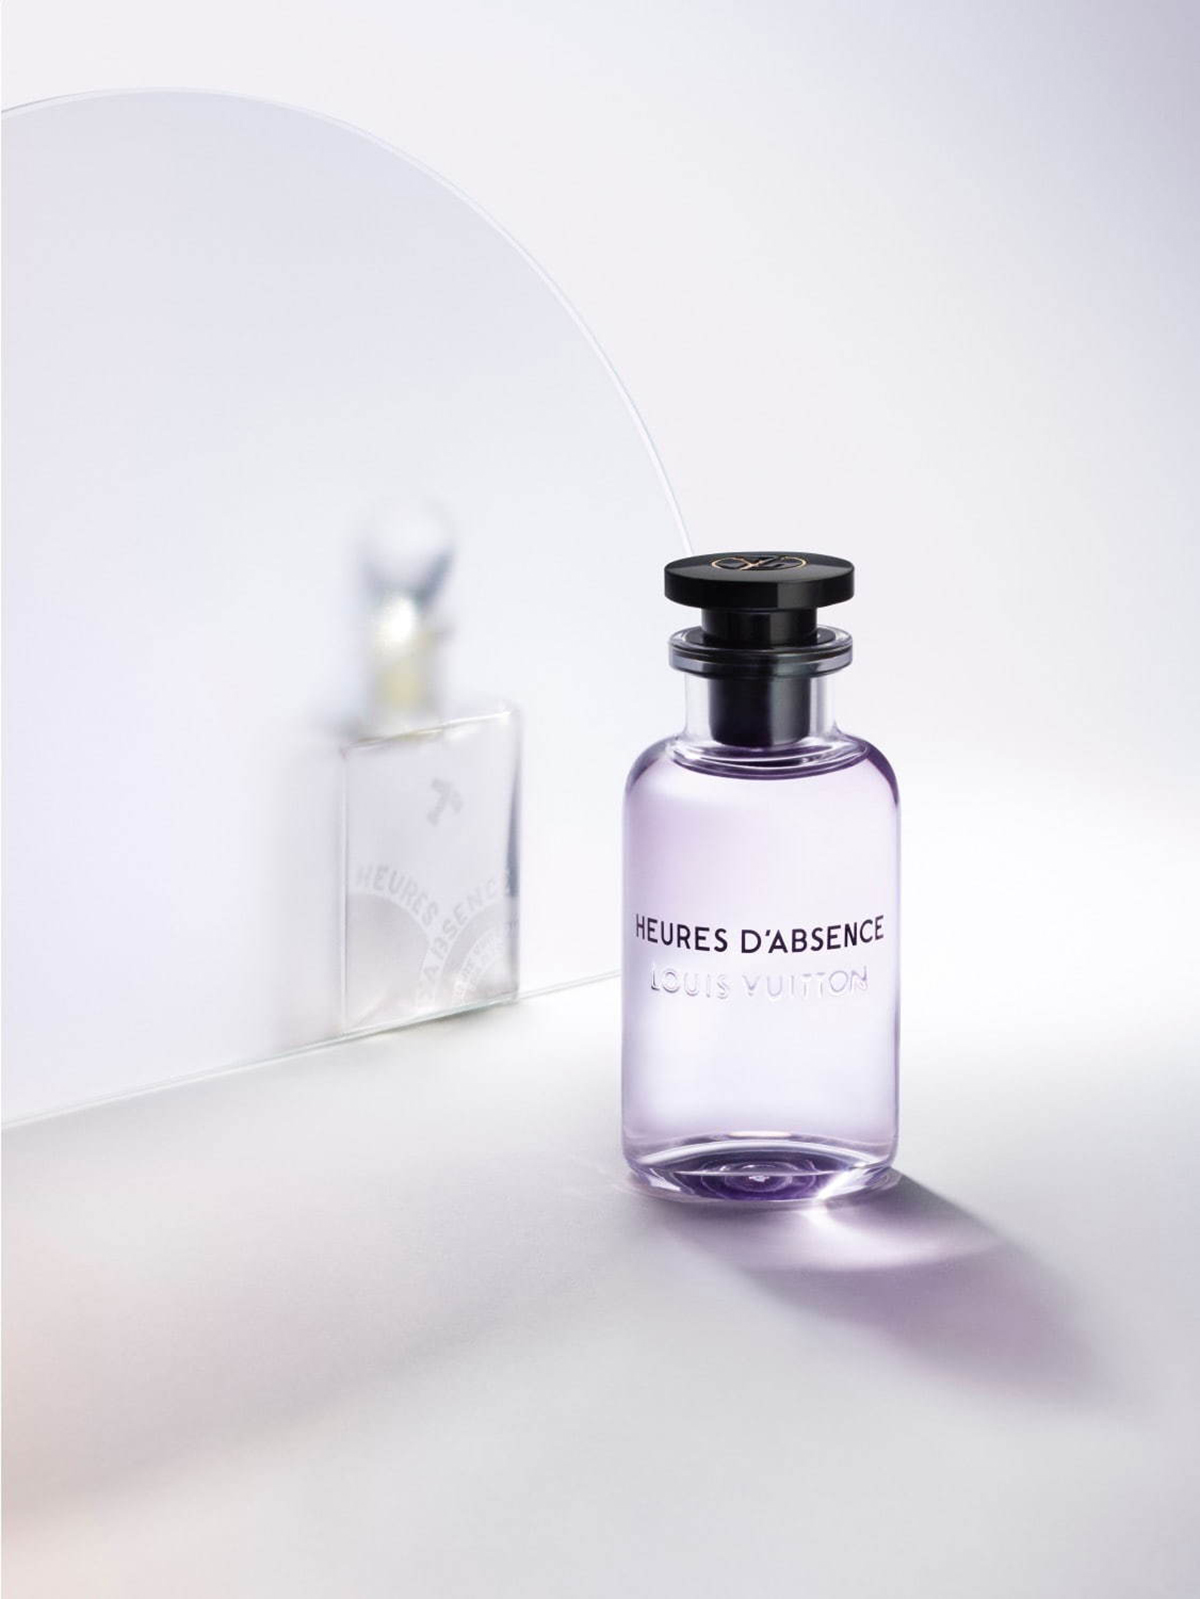 Heures d'Absence Louis Vuitton perfume - a new fragrance for women 2020